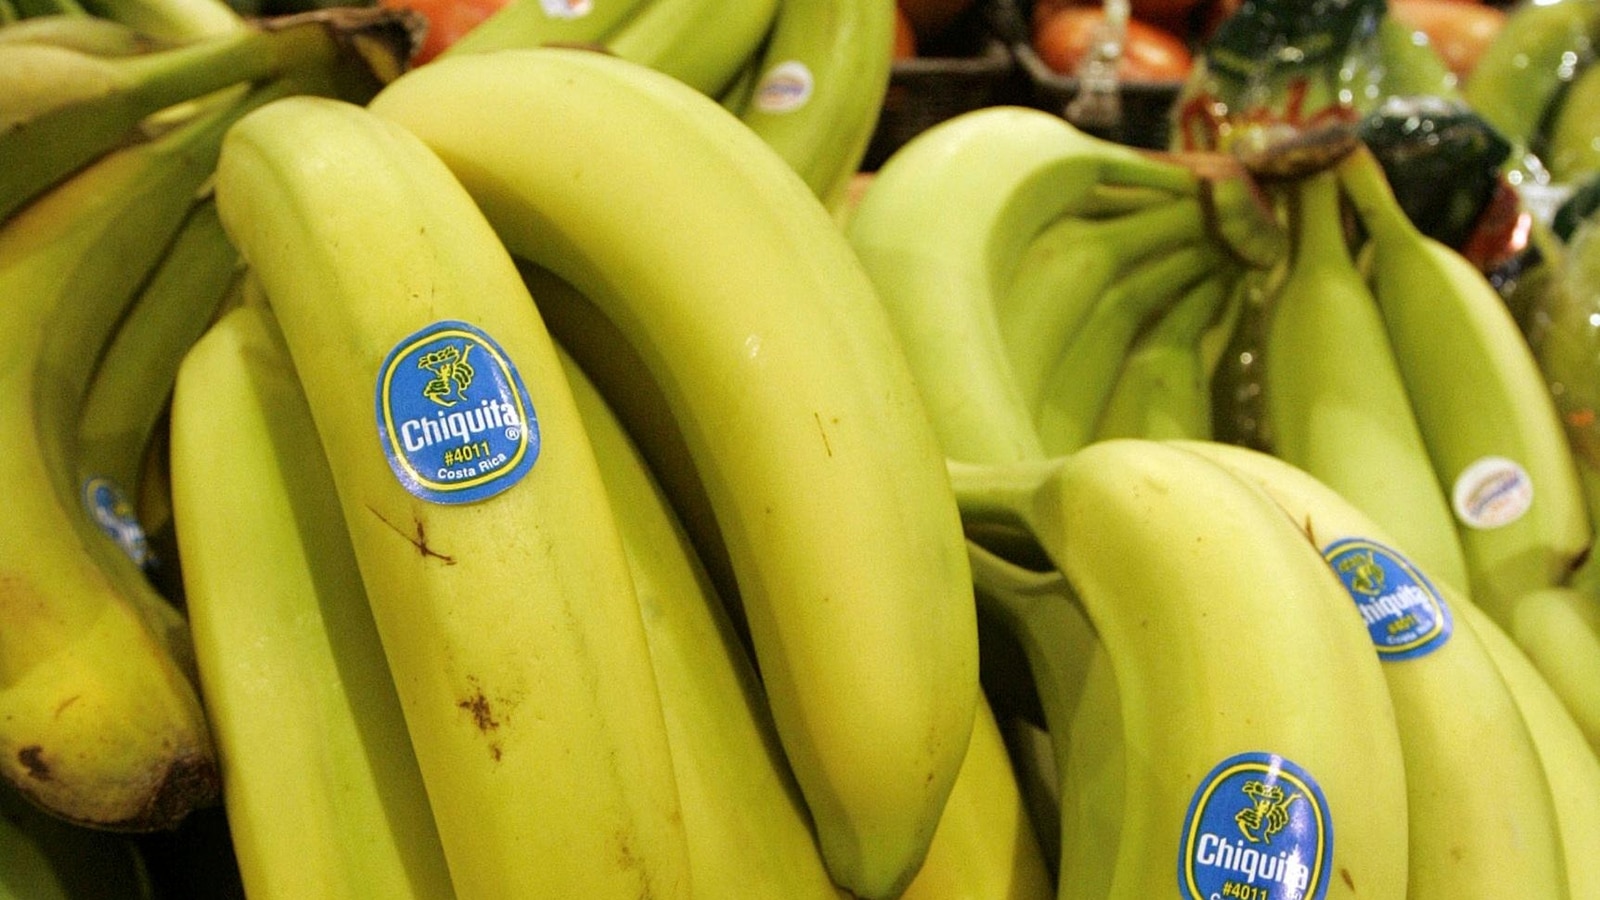 Florida jury finds Chiquita Brands liable for Colombia deaths and must pay $38.3 million to family members